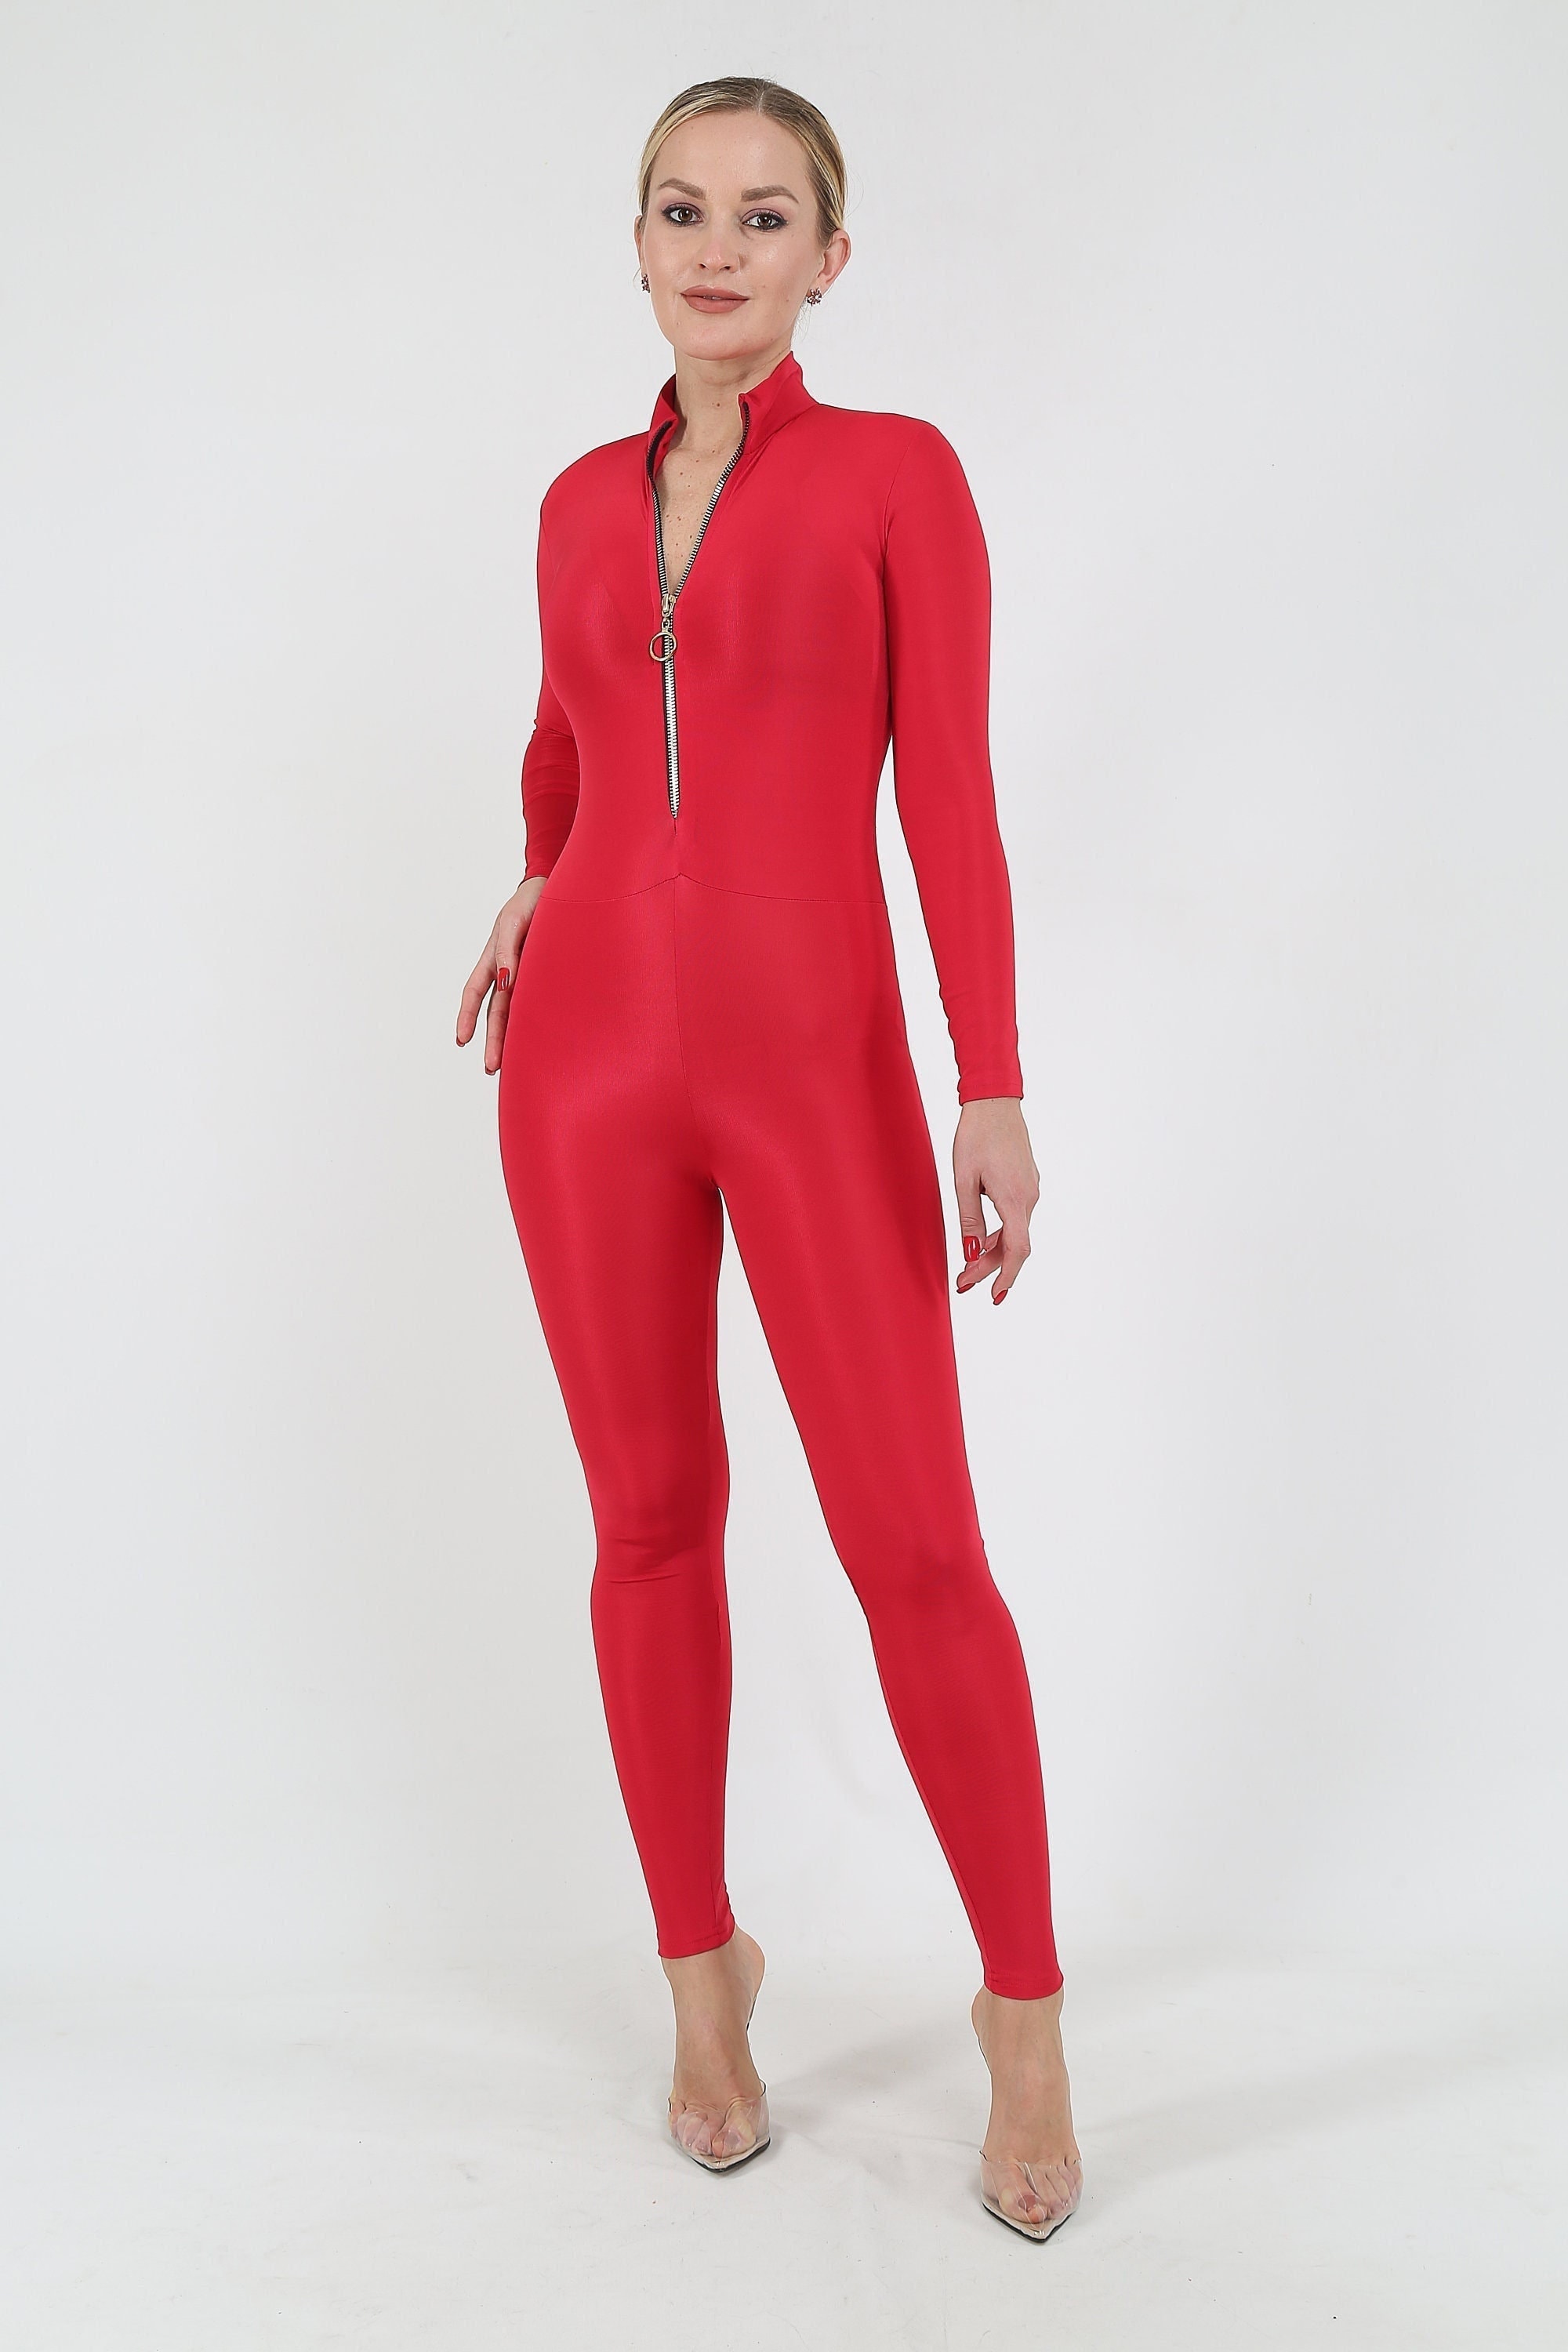 Red Zippered Catsuit ,lycra Body Suit, Bodycon Jumpsuit, Holiday